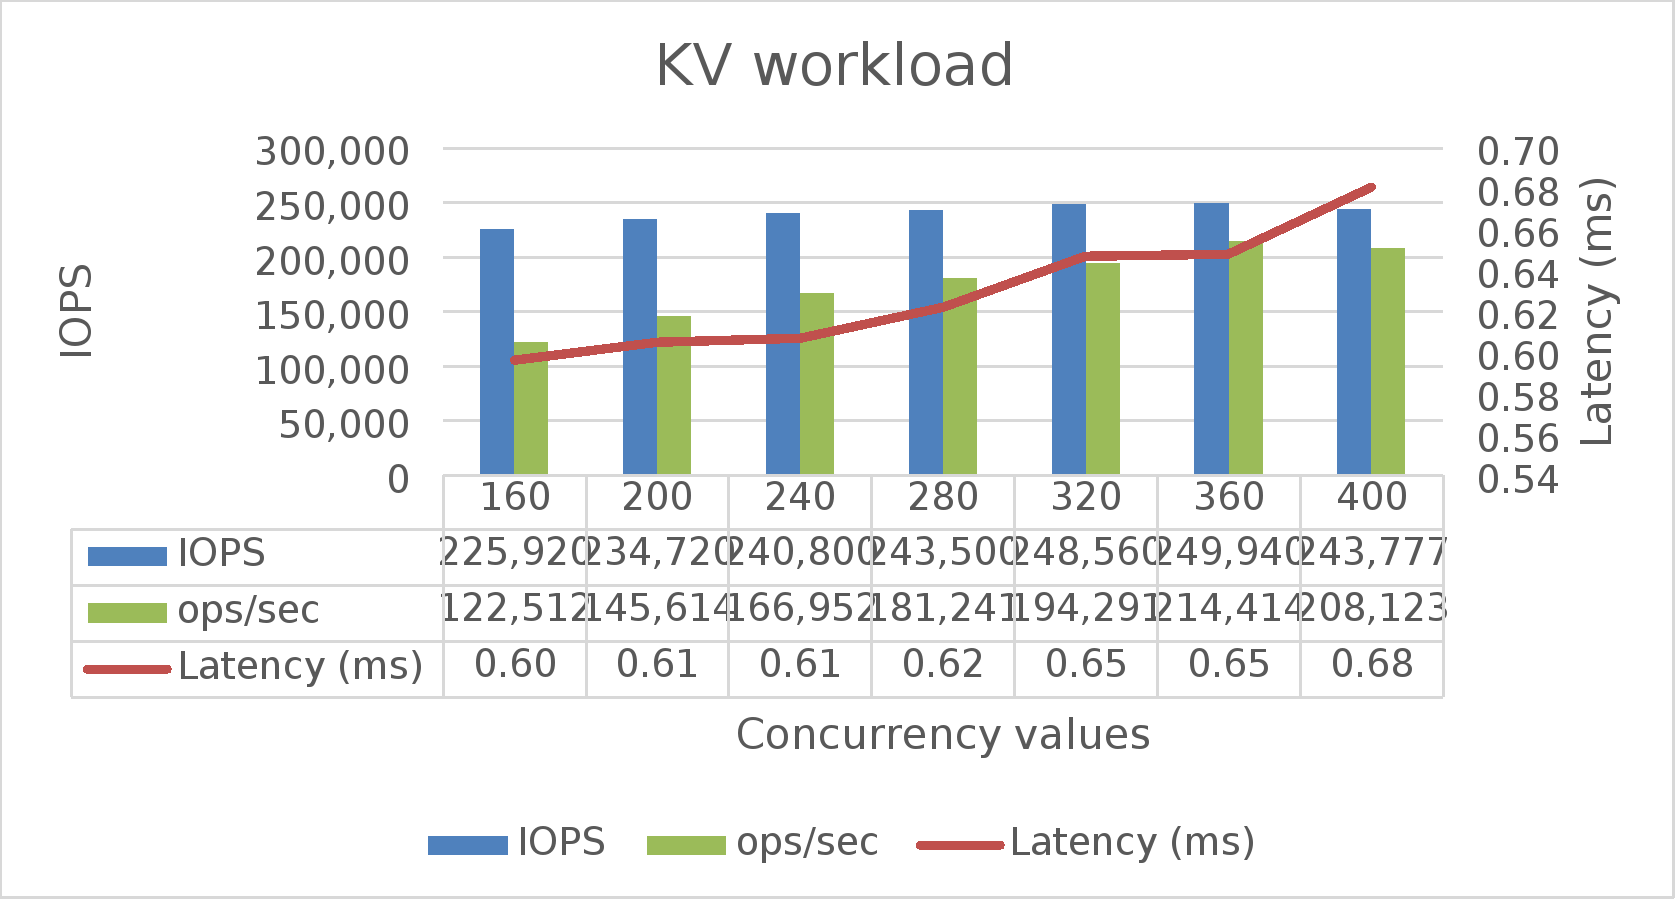 The following graph shows the concurrency values in the KV workload.